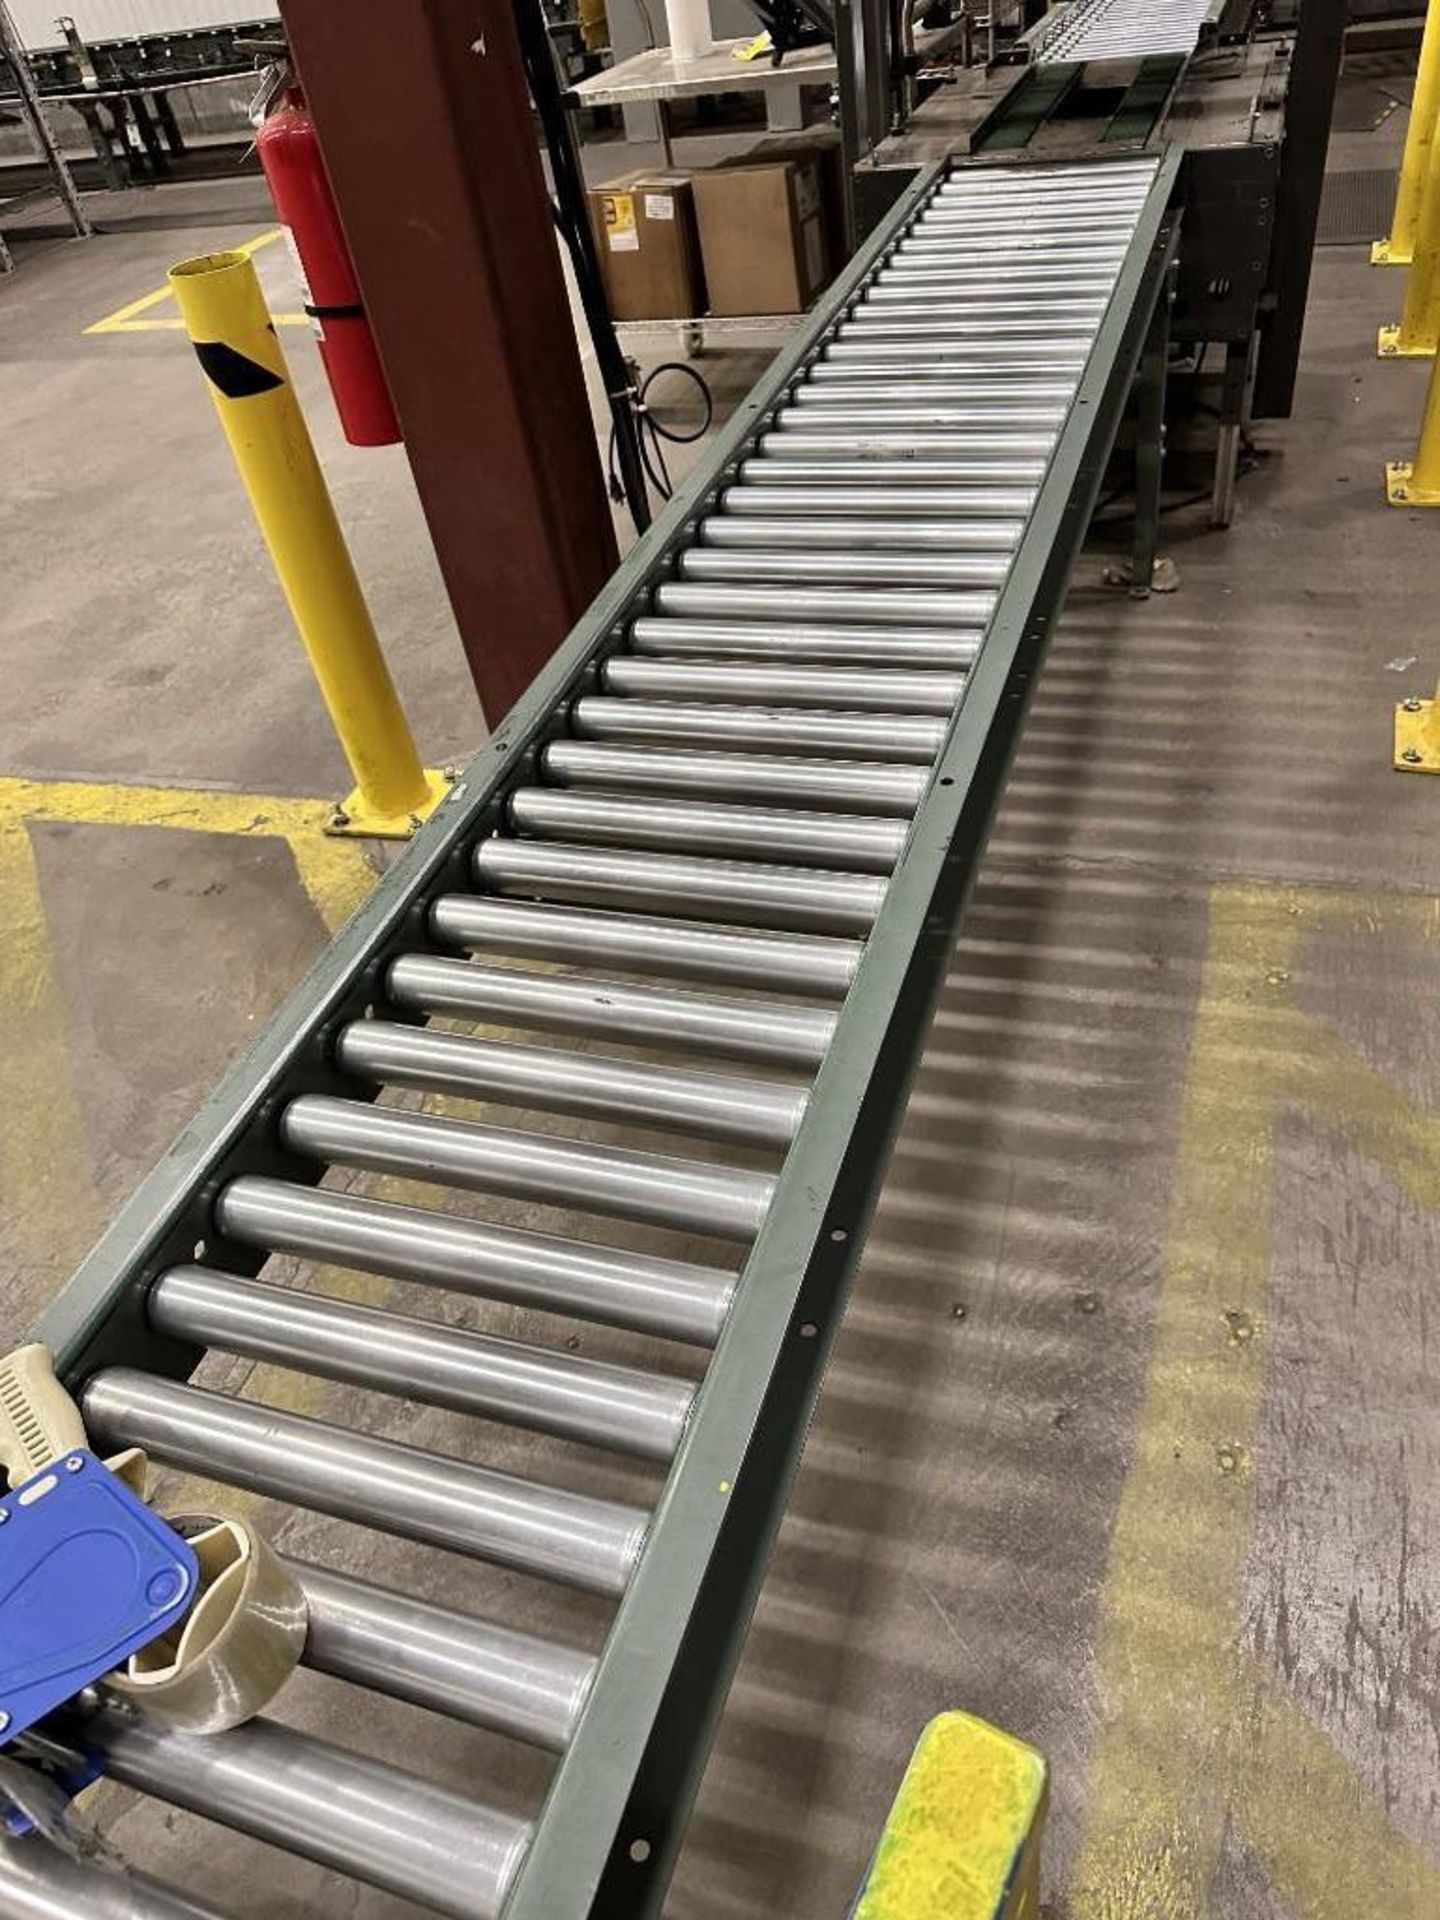 HYTROL POWER CONVEYOR SYSTEM 57 FOOT LONG DRIVEN. WITH BOX SHIFTER - Image 7 of 10